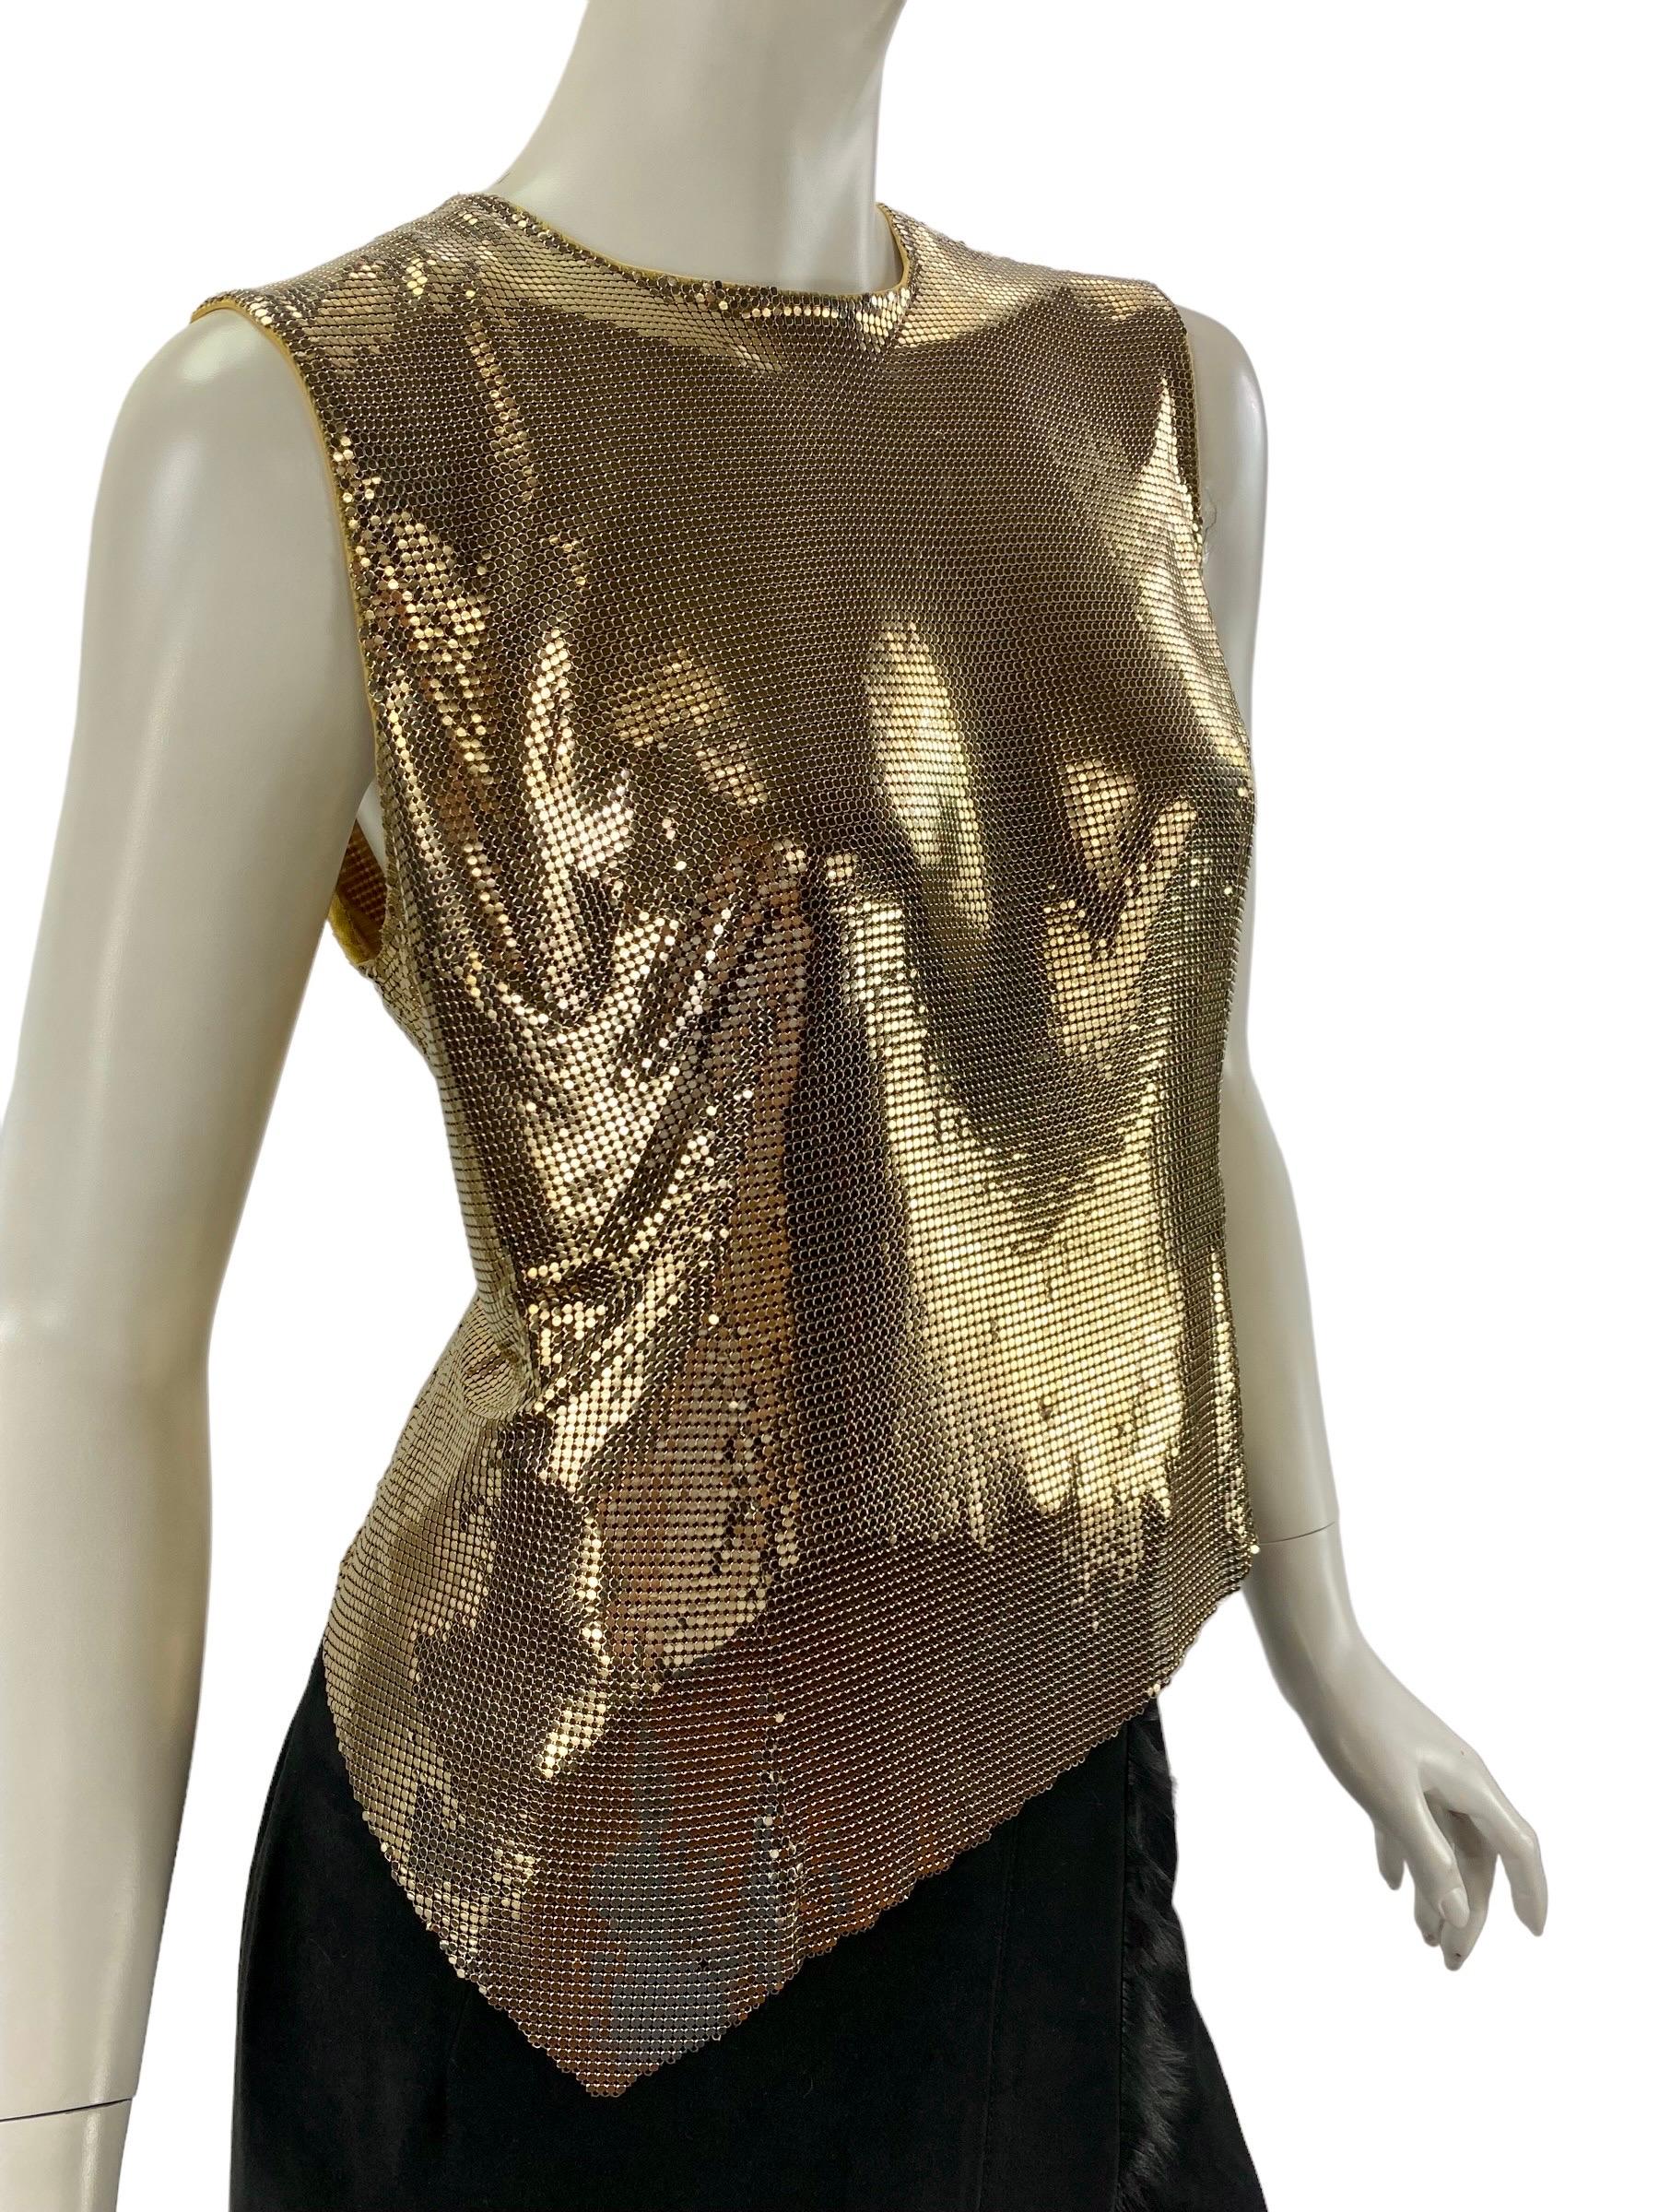 F/W 1994 Gianni Versace Couture Gold Metal Mesh Oroton Top
Size: Italian - 40, US - 4
Zipper on the back, Fully lined.
Measurements: length - 18 inches ( highest part ), 22